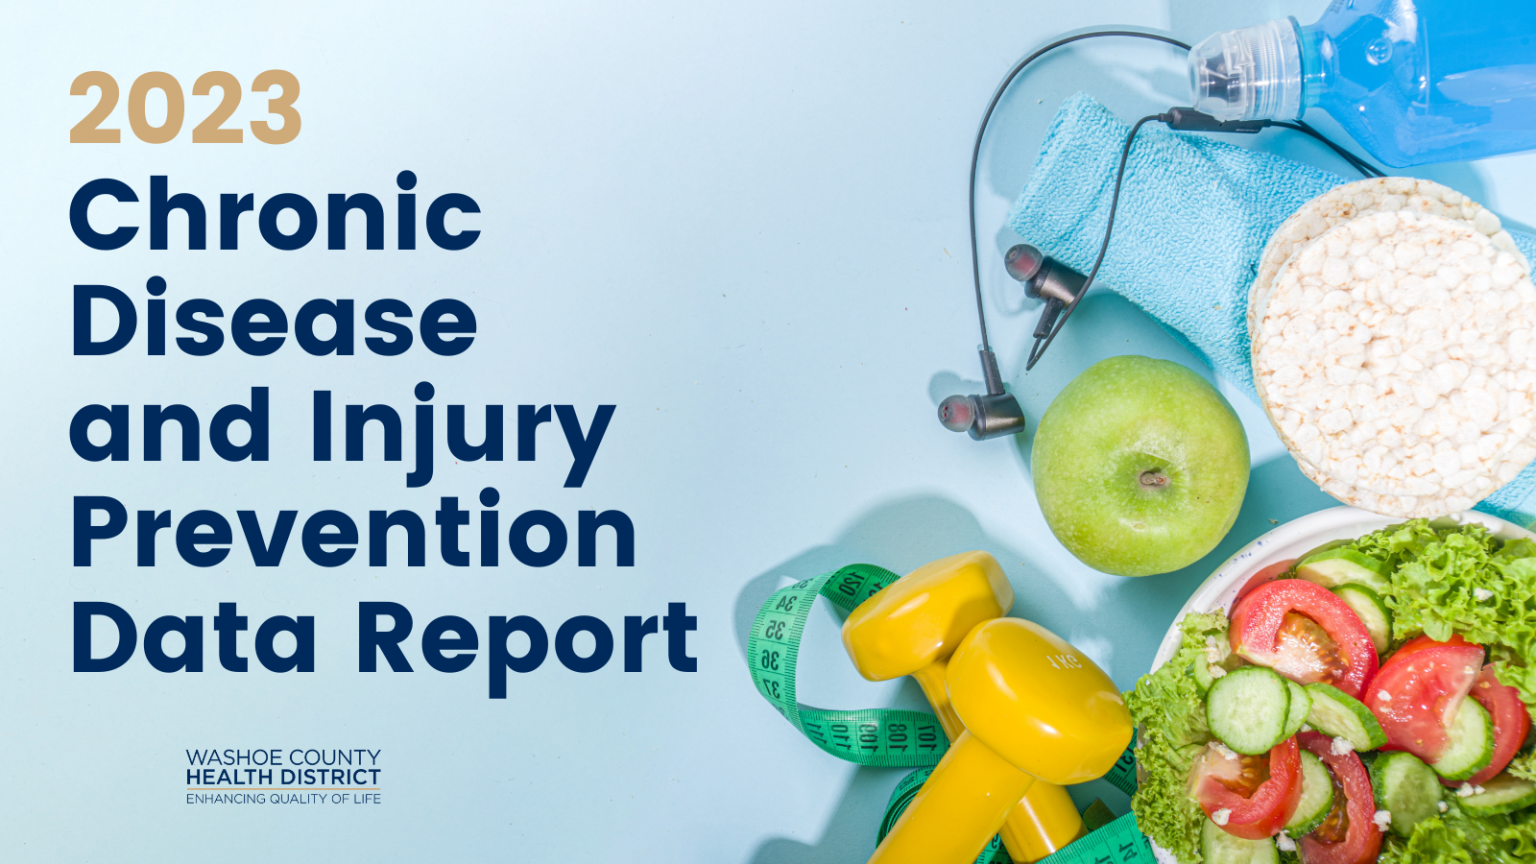 A summary report of chronic health conditions, injuries and their primary risk factors for Washoe County and the United States